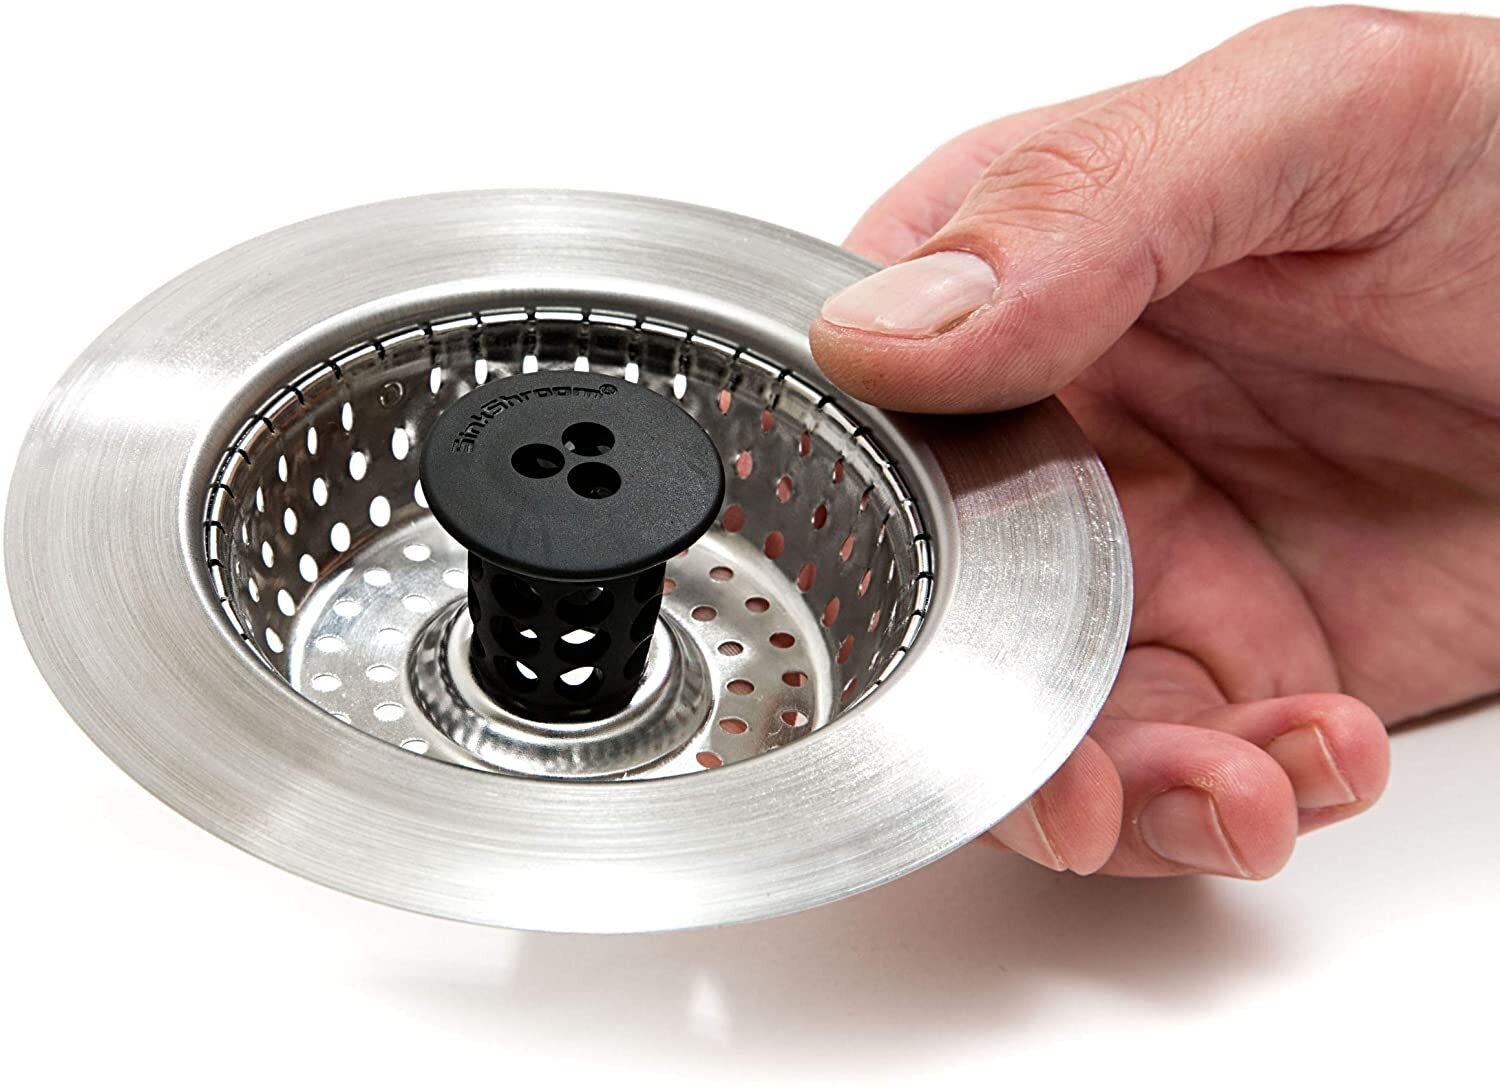 Hand placing a mesh kitchen sink strainer into the sink&#x27;s drain